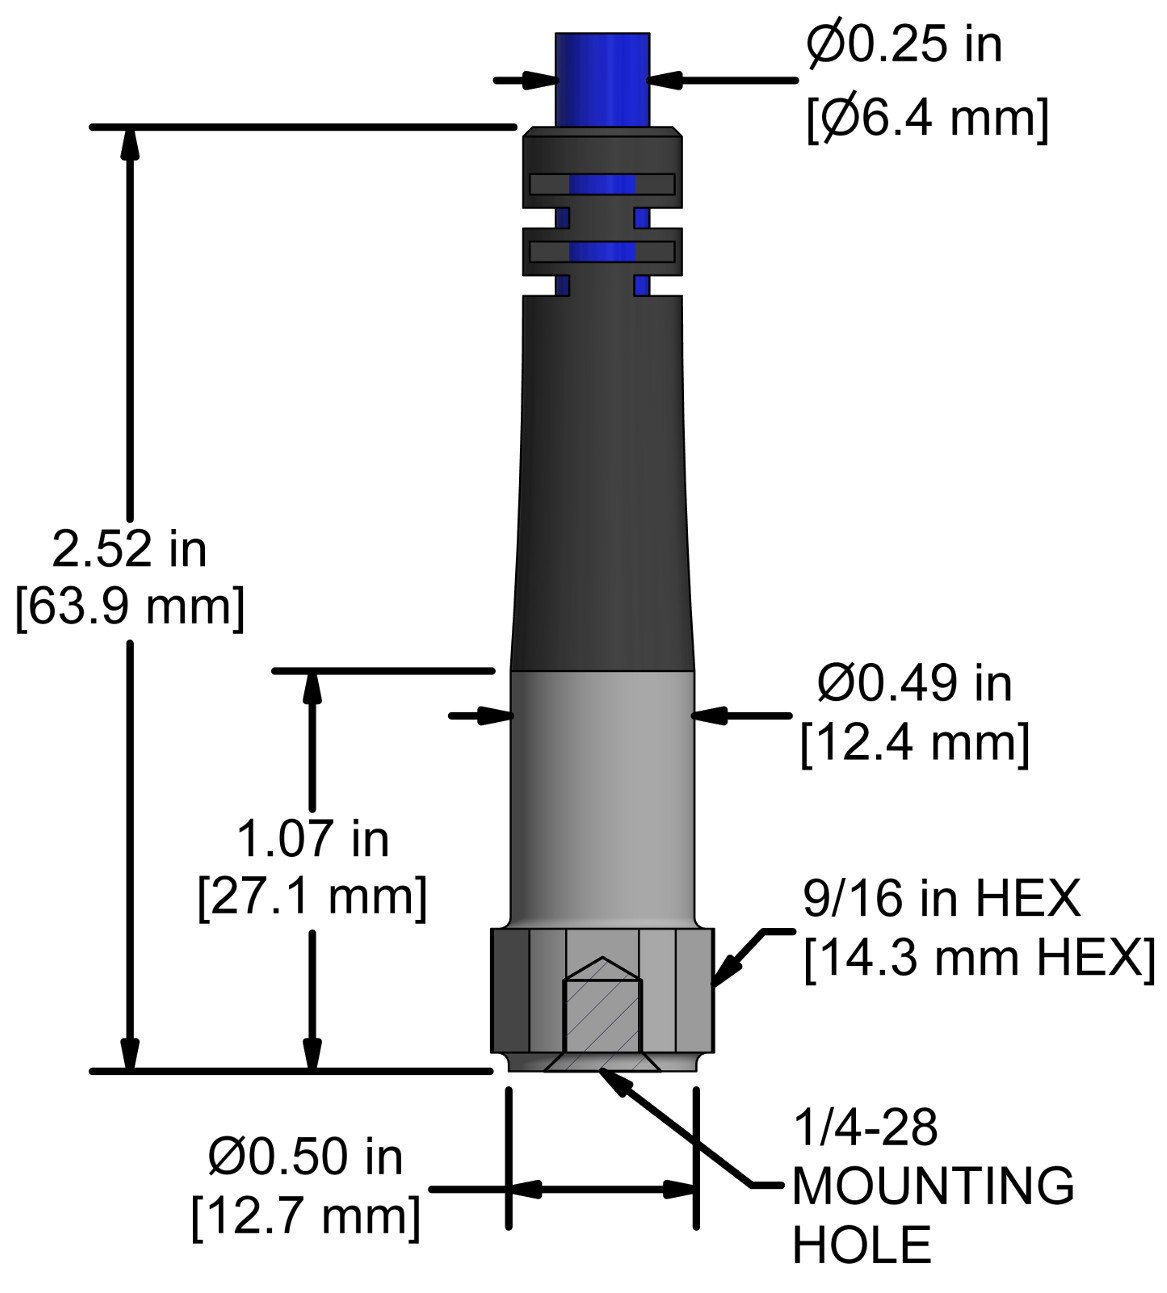 A drawing showing the dimensions and pin configuration of a CTC AC971 industrial accelerometer.